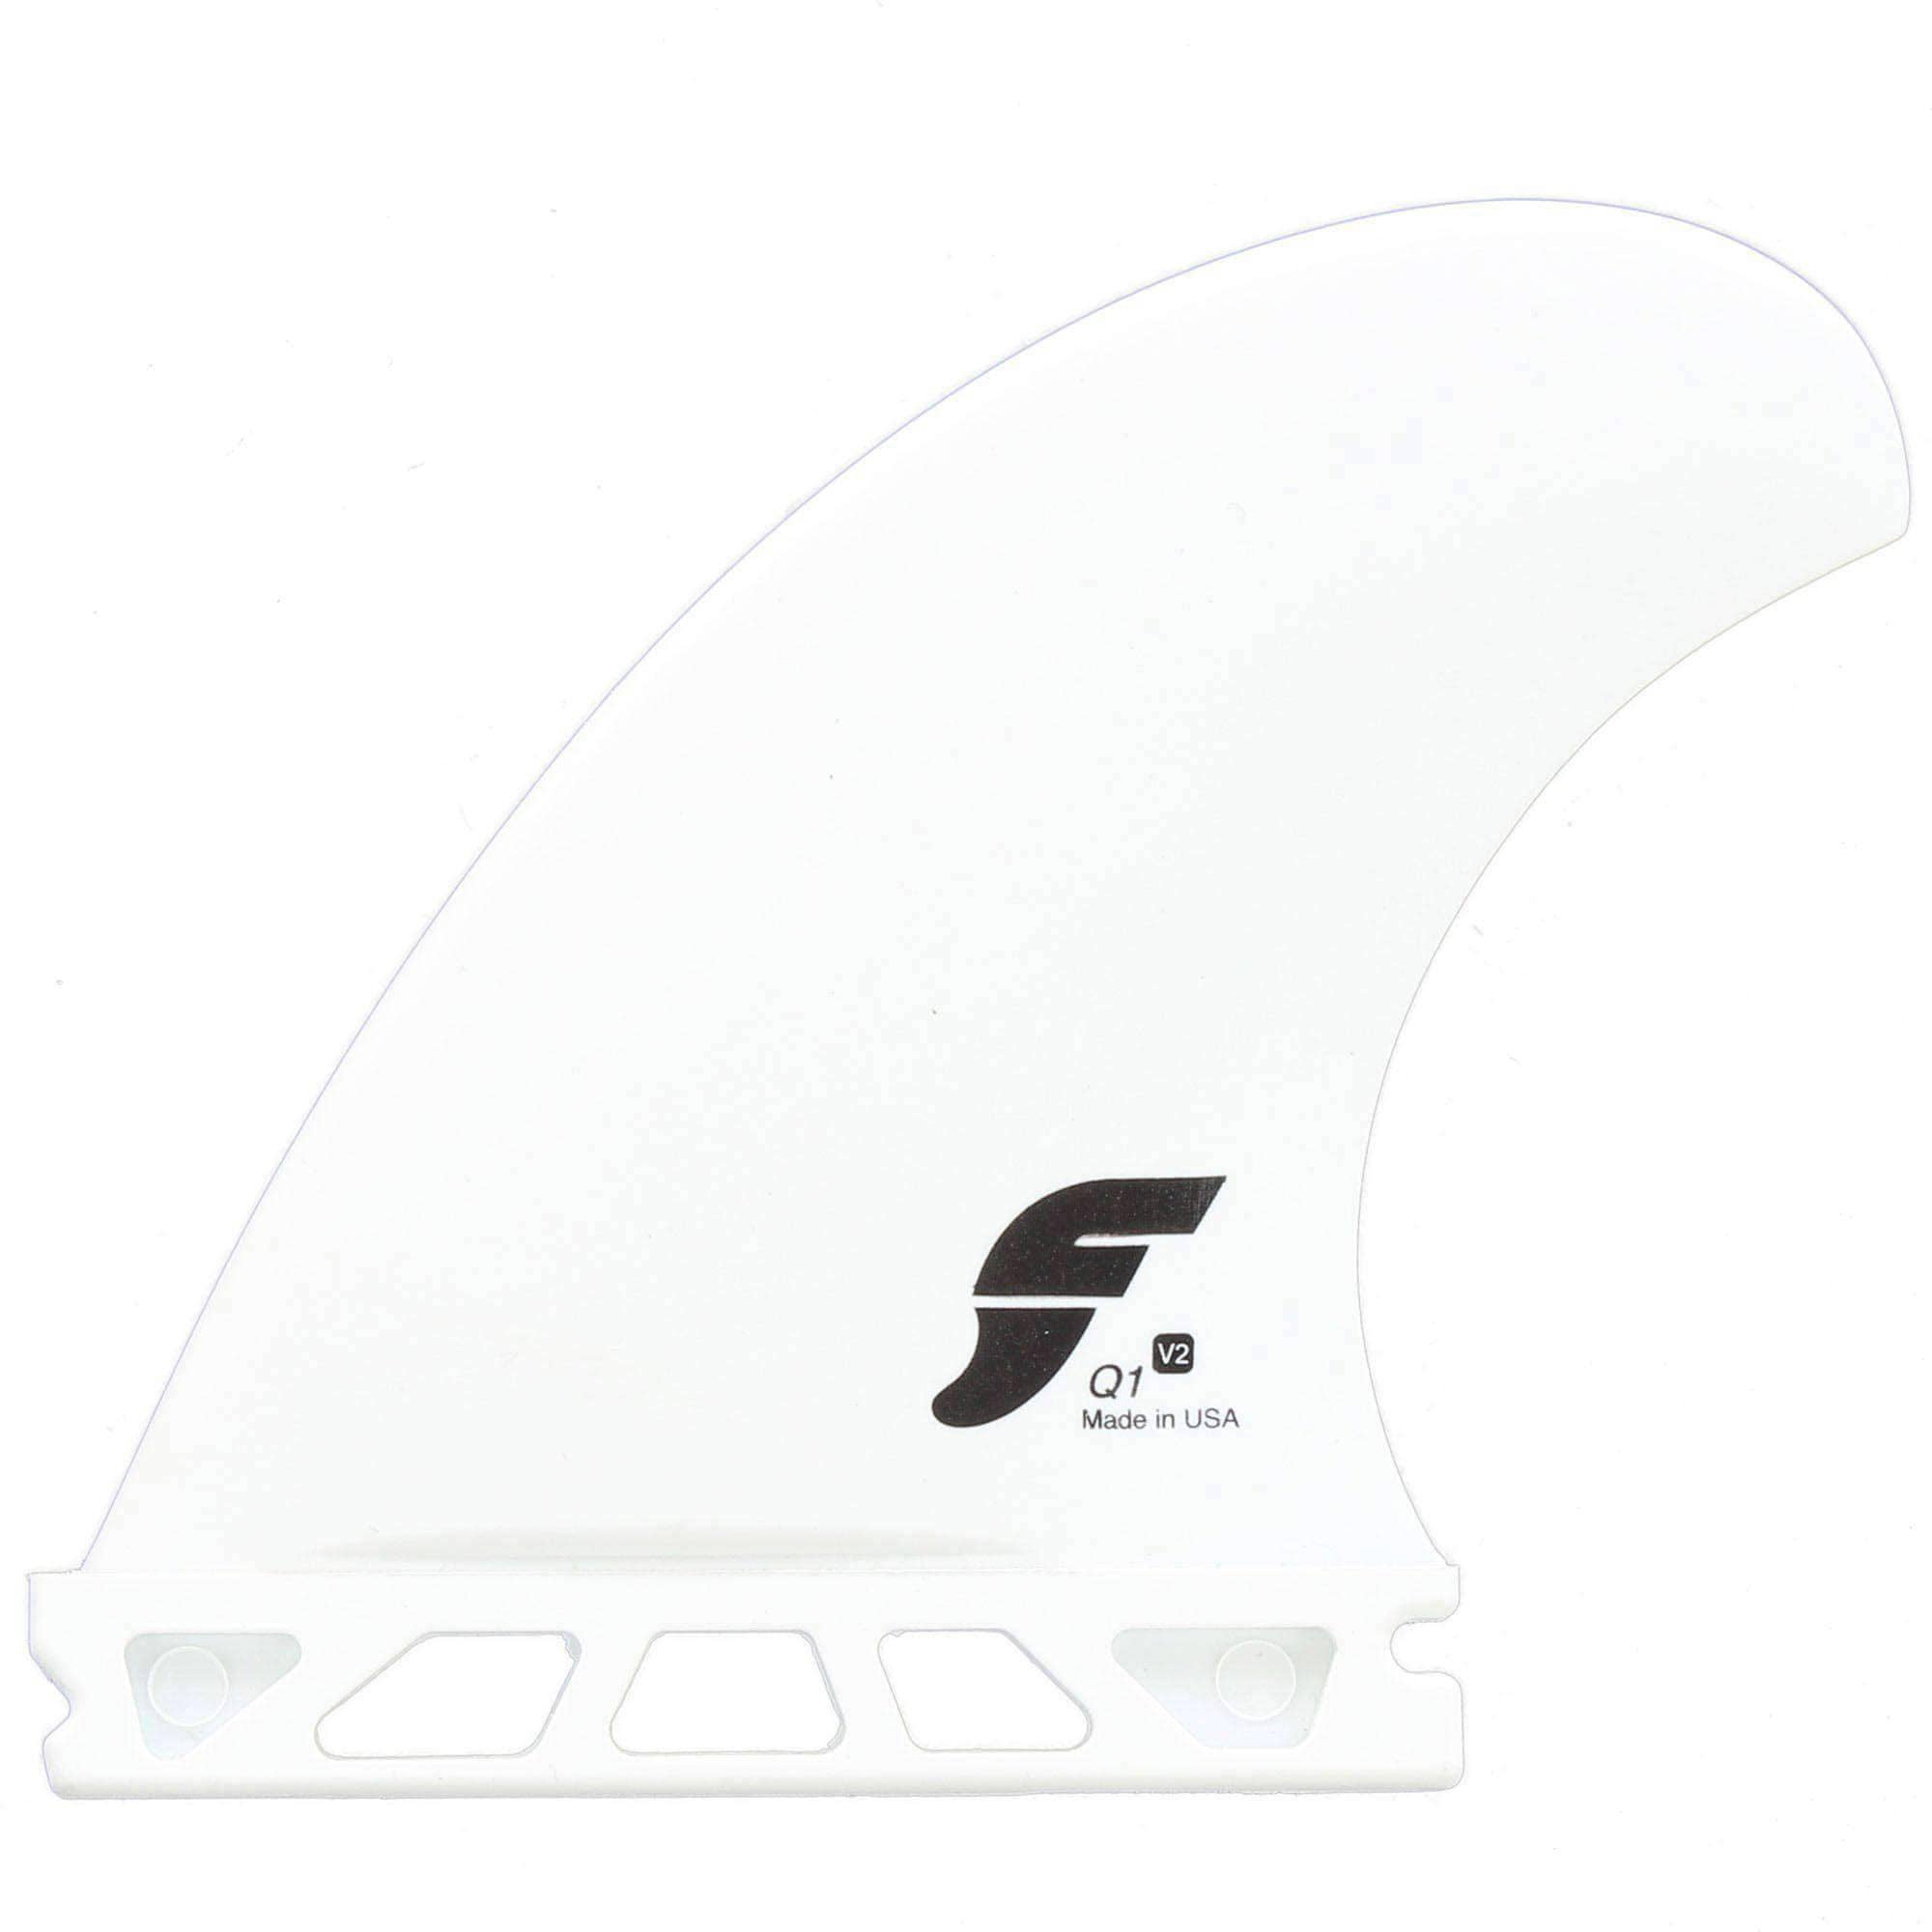 Futures Q1 V2 Quad Thermotech Surfboard Fins Futures Single Tab Fins by Futures Medium Fins